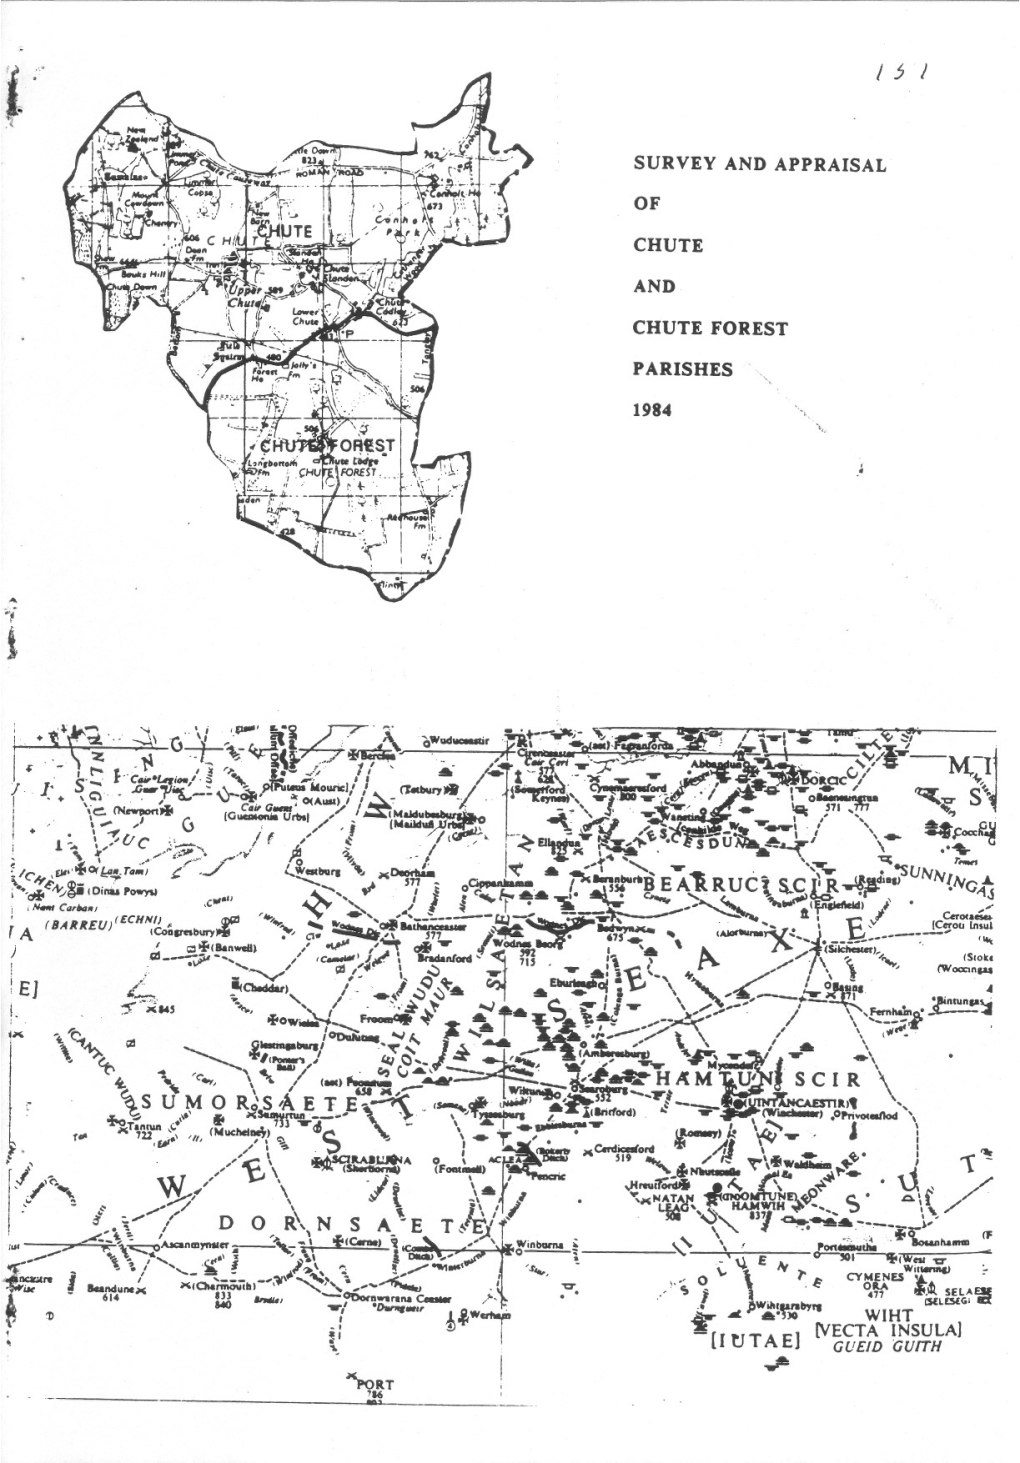 Survey and Appraisal of Chute and Chute Forest Parishes 1984